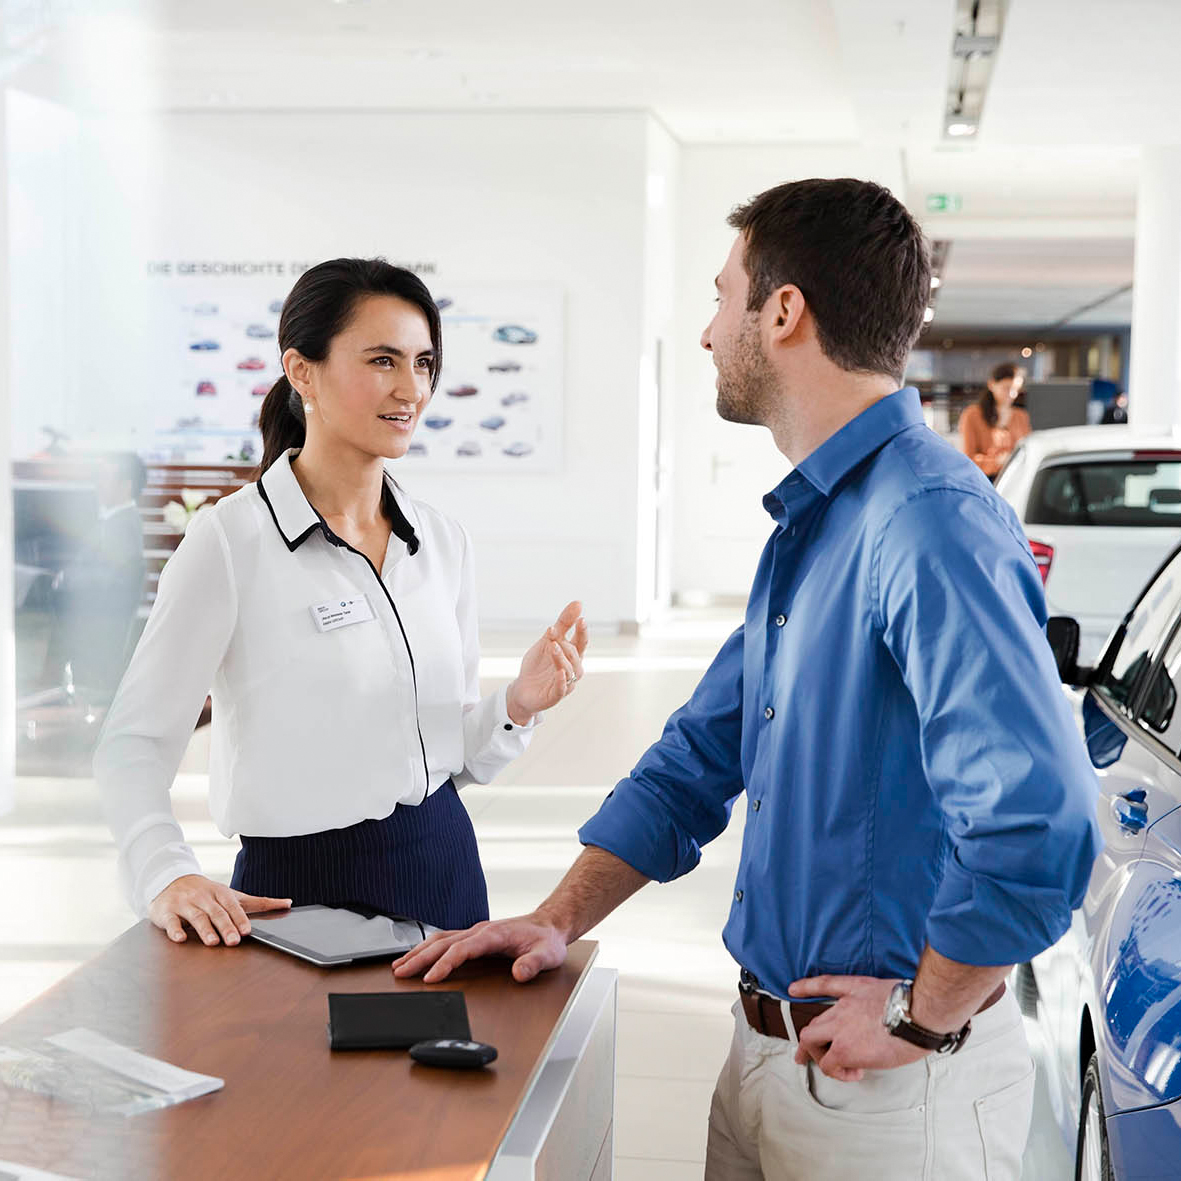 The image shows two BMW Group employees having a conversation.